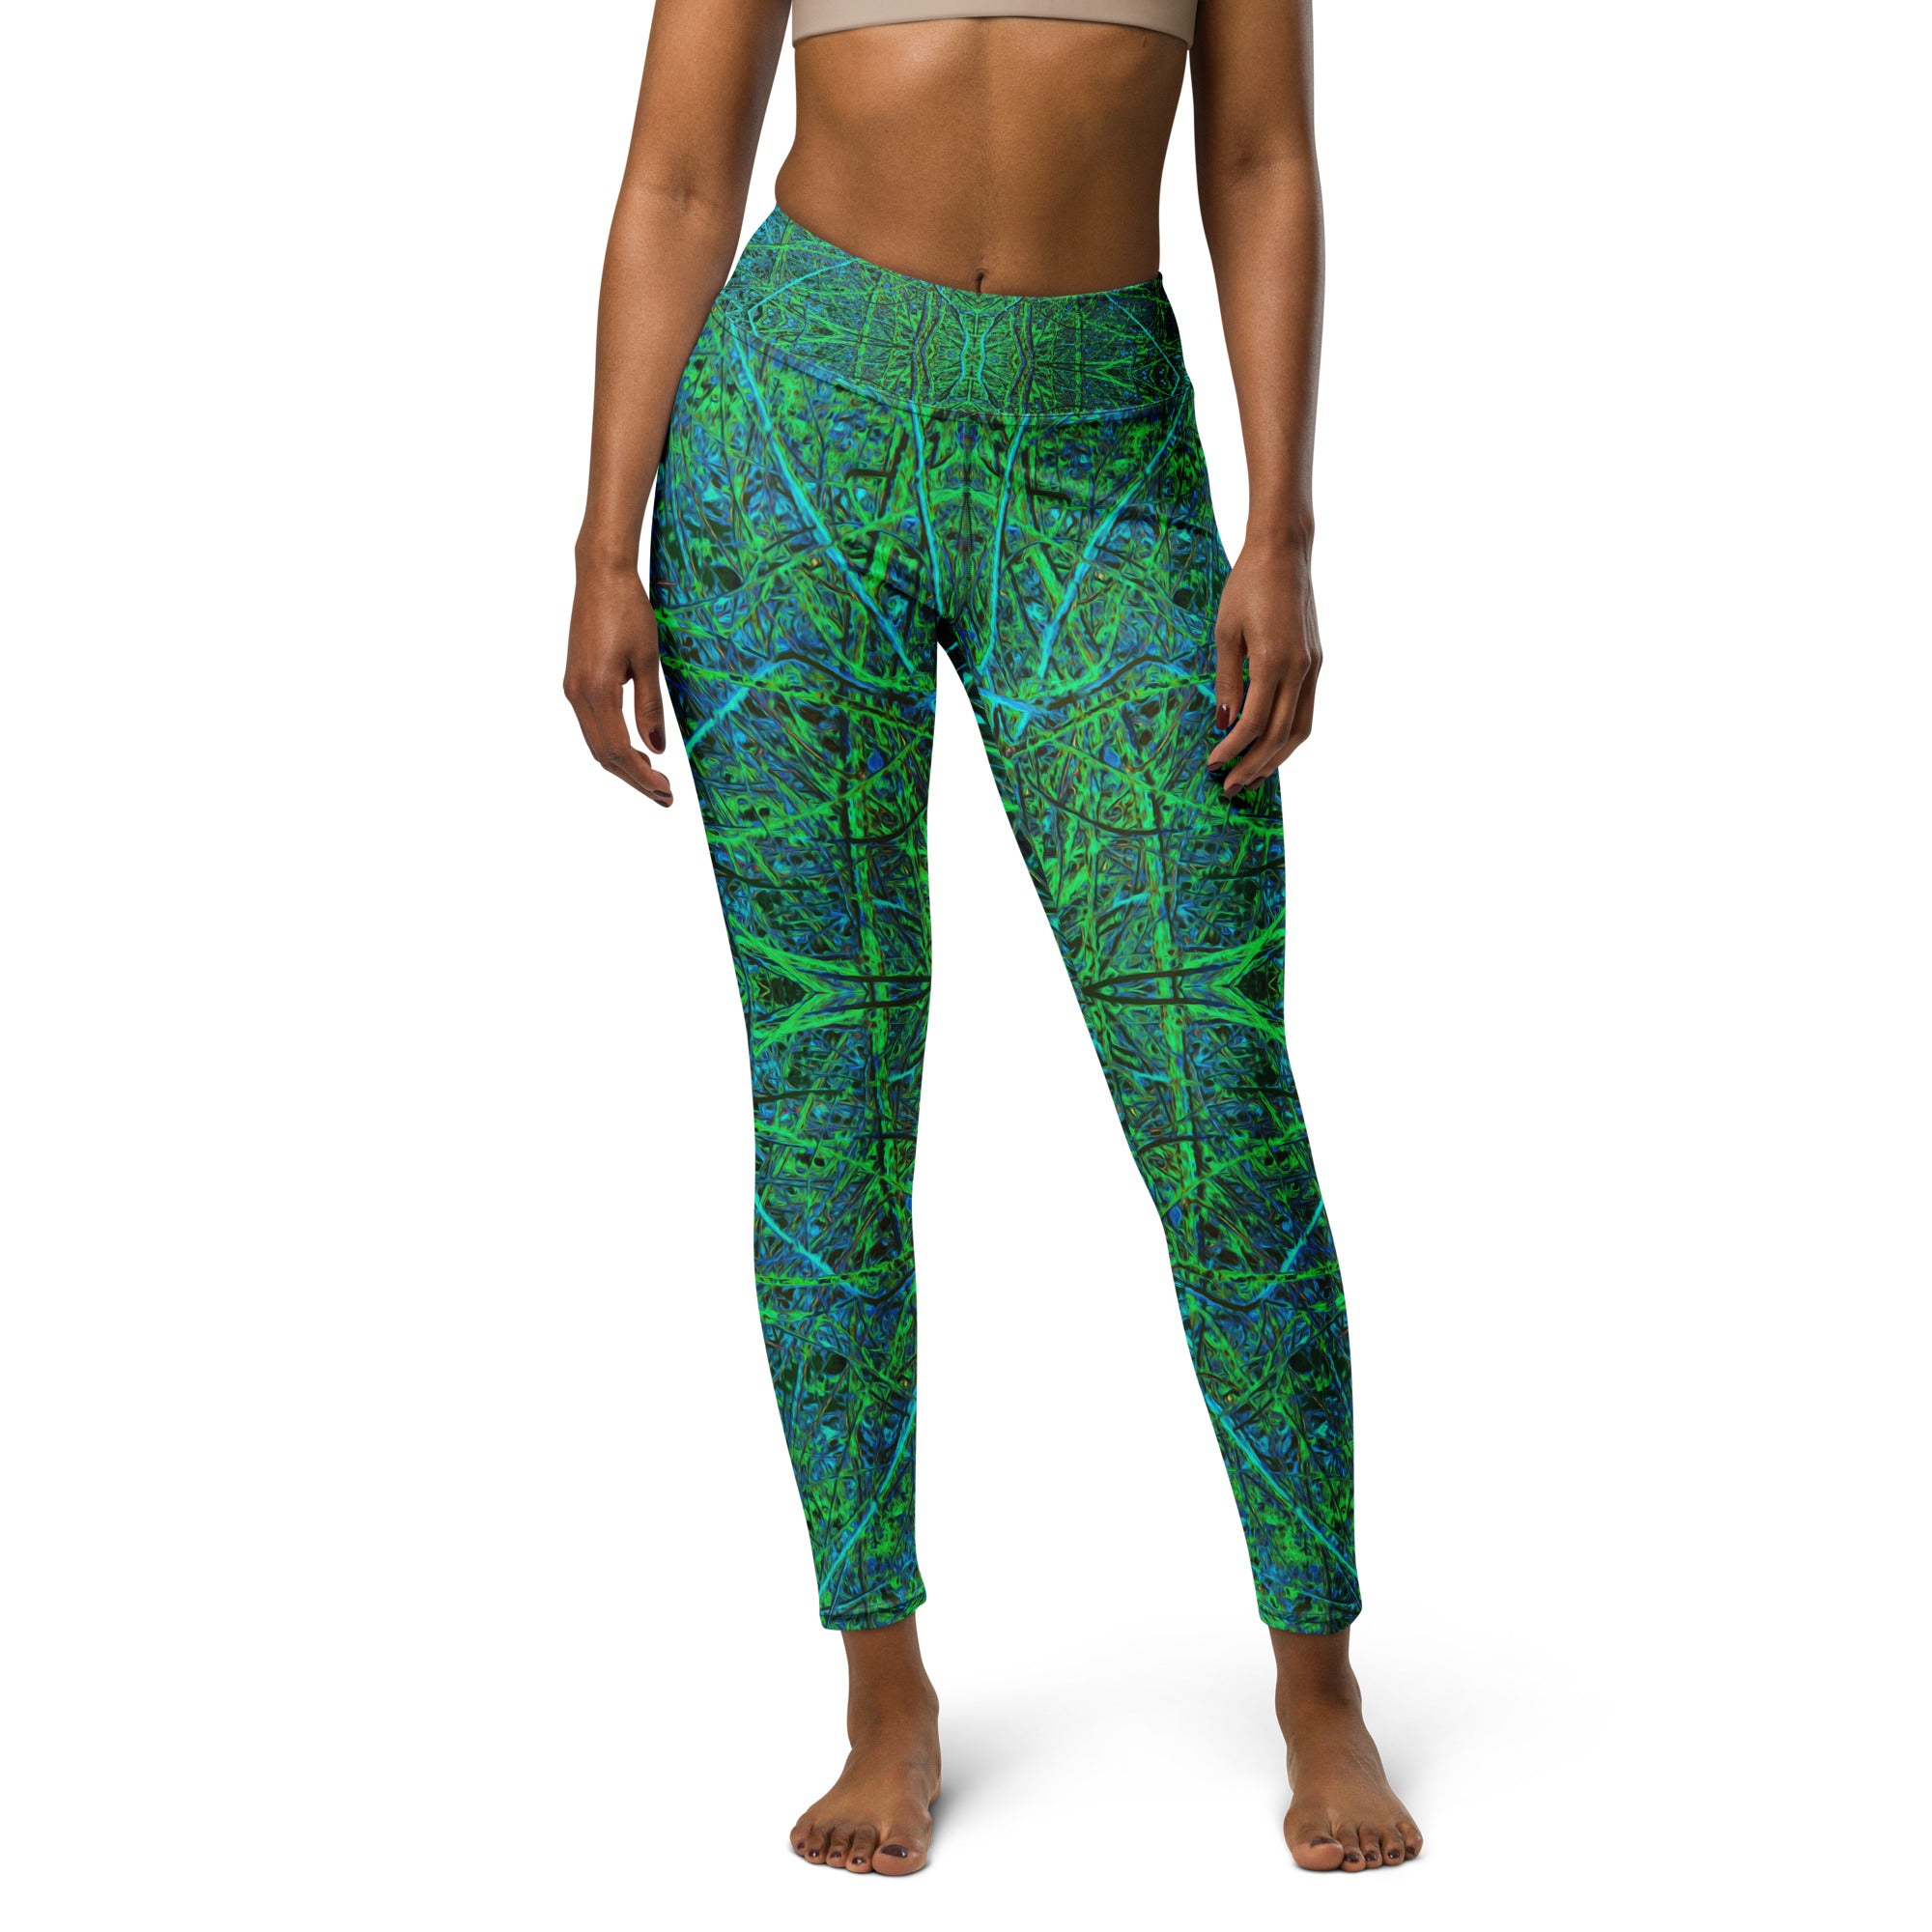 Yoga Leggings for Women - Cool Lime Green Abstract Branch Pattern